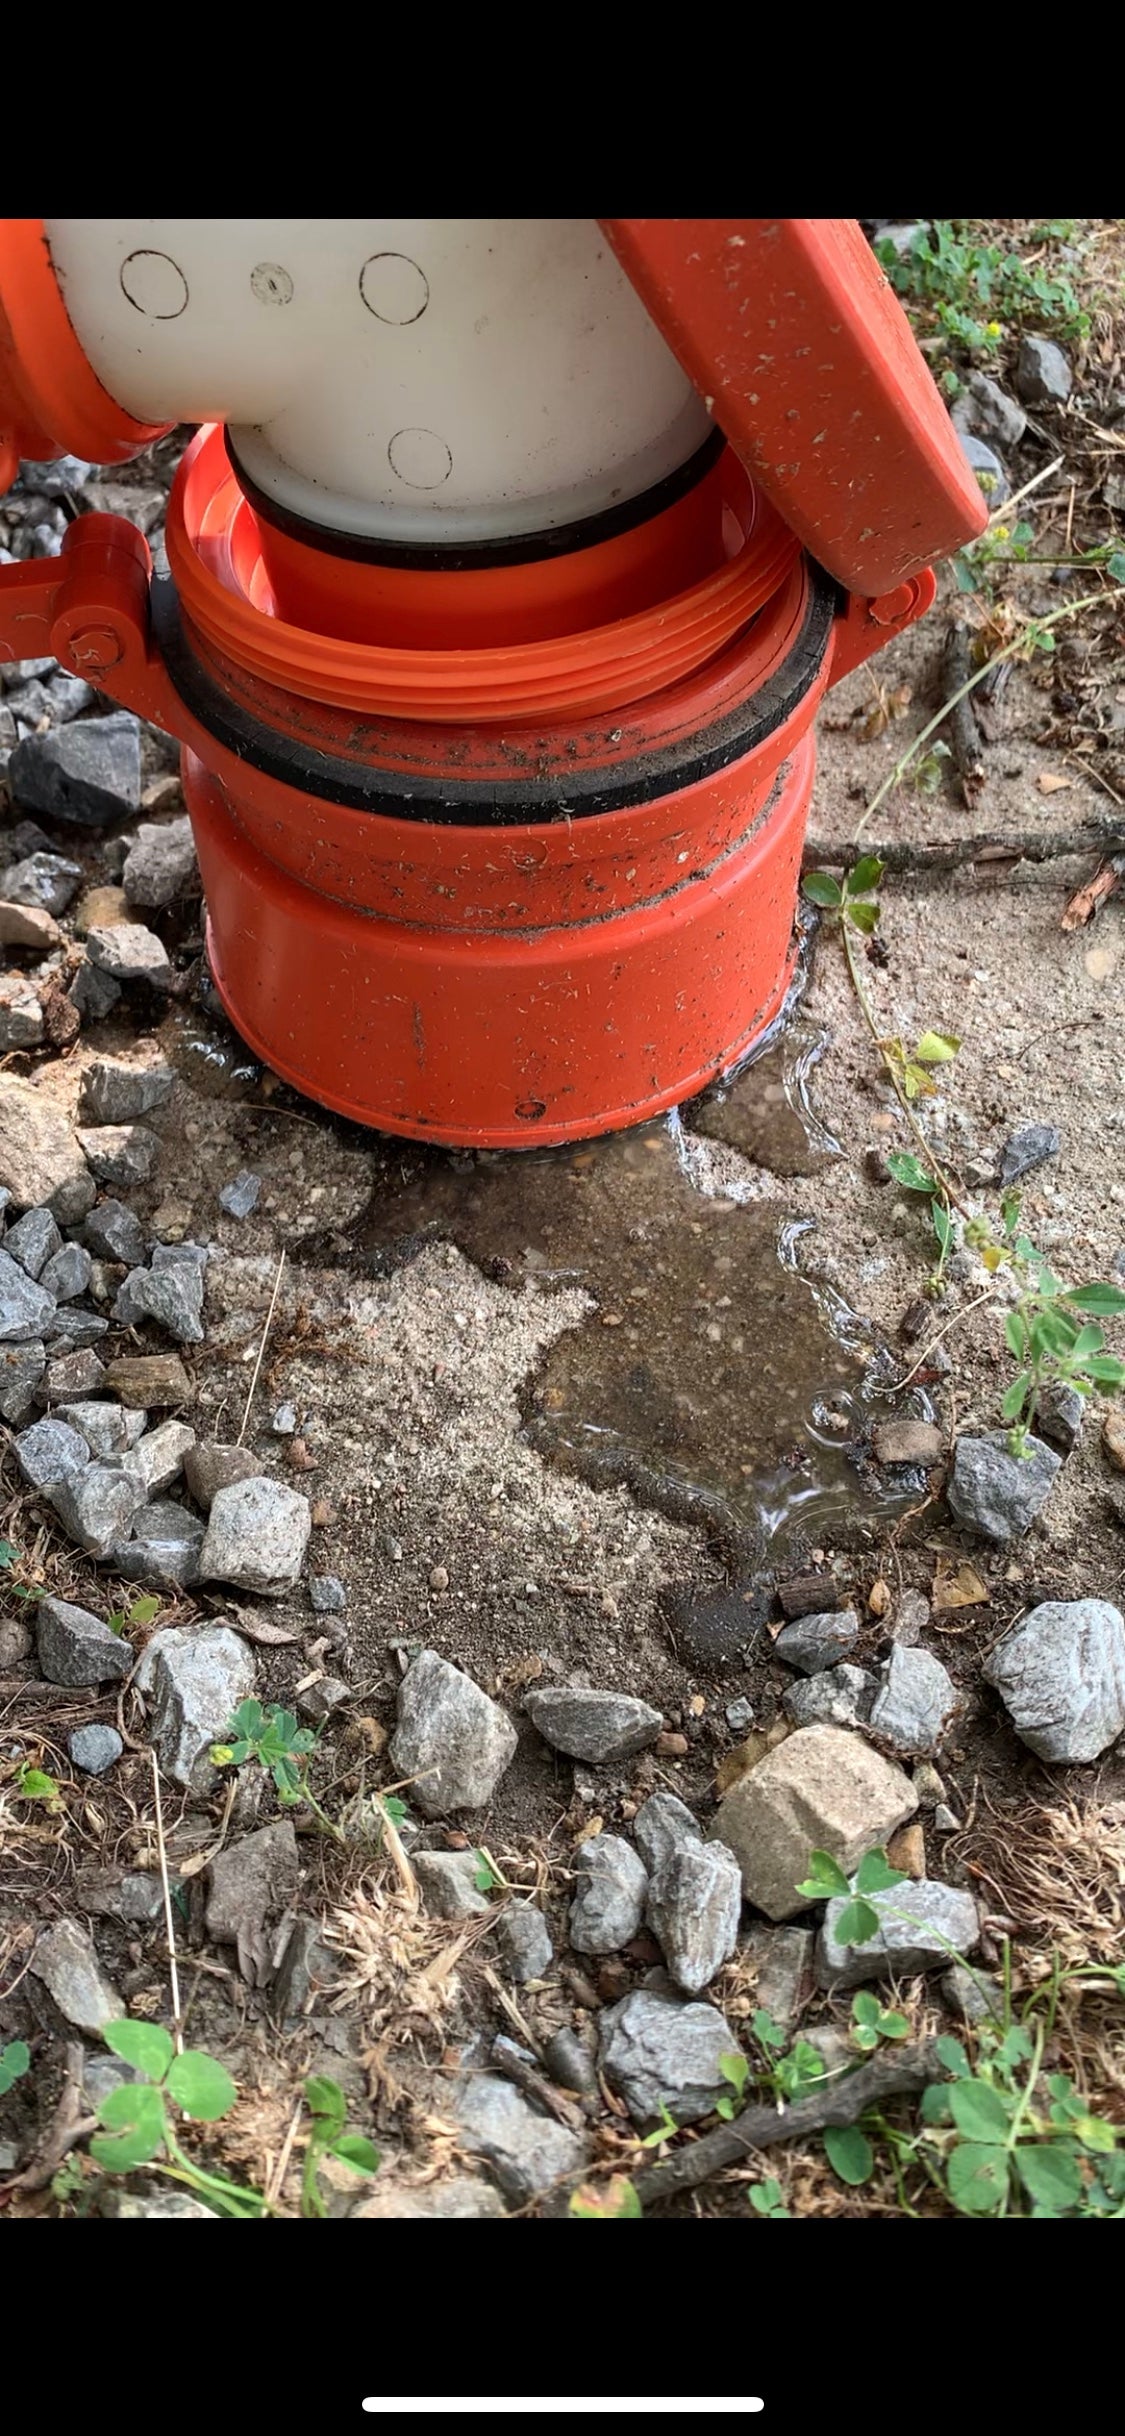 sewer pipe leaking, this was a large gross puddle by the time we were done dumping our tank.  We notified the campground of this and even showed them video and they did nothing, management wouldn't even call me or stop by to respond to me.